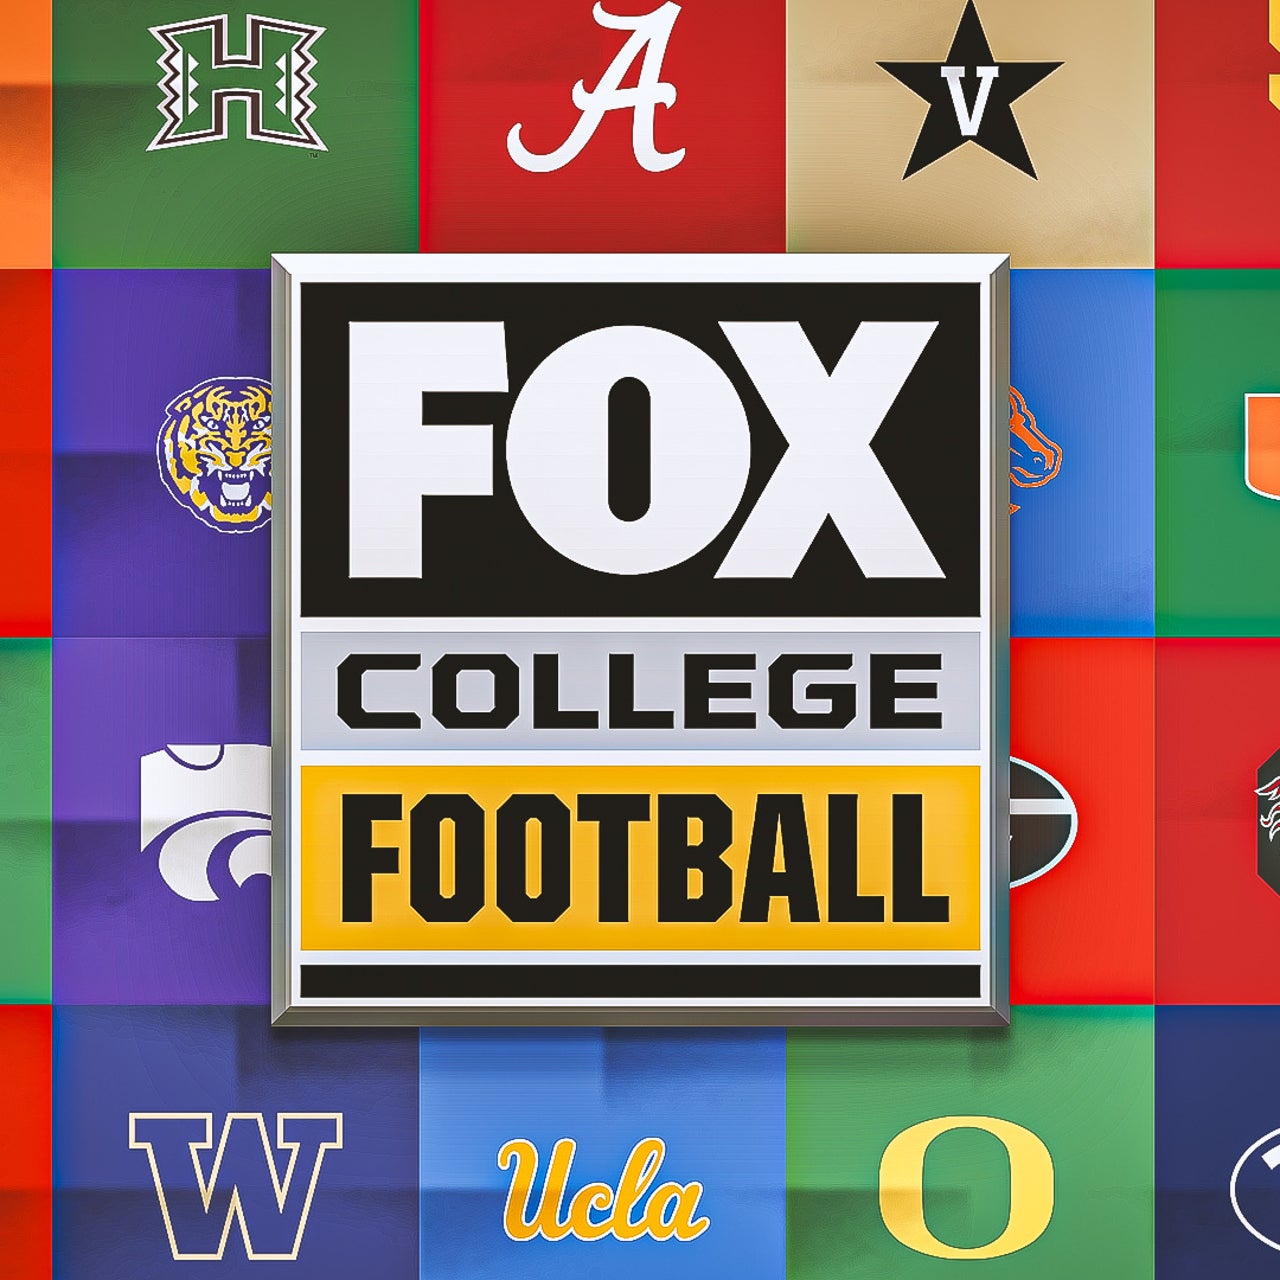 College Football Bowl Schedule, TV Information How To